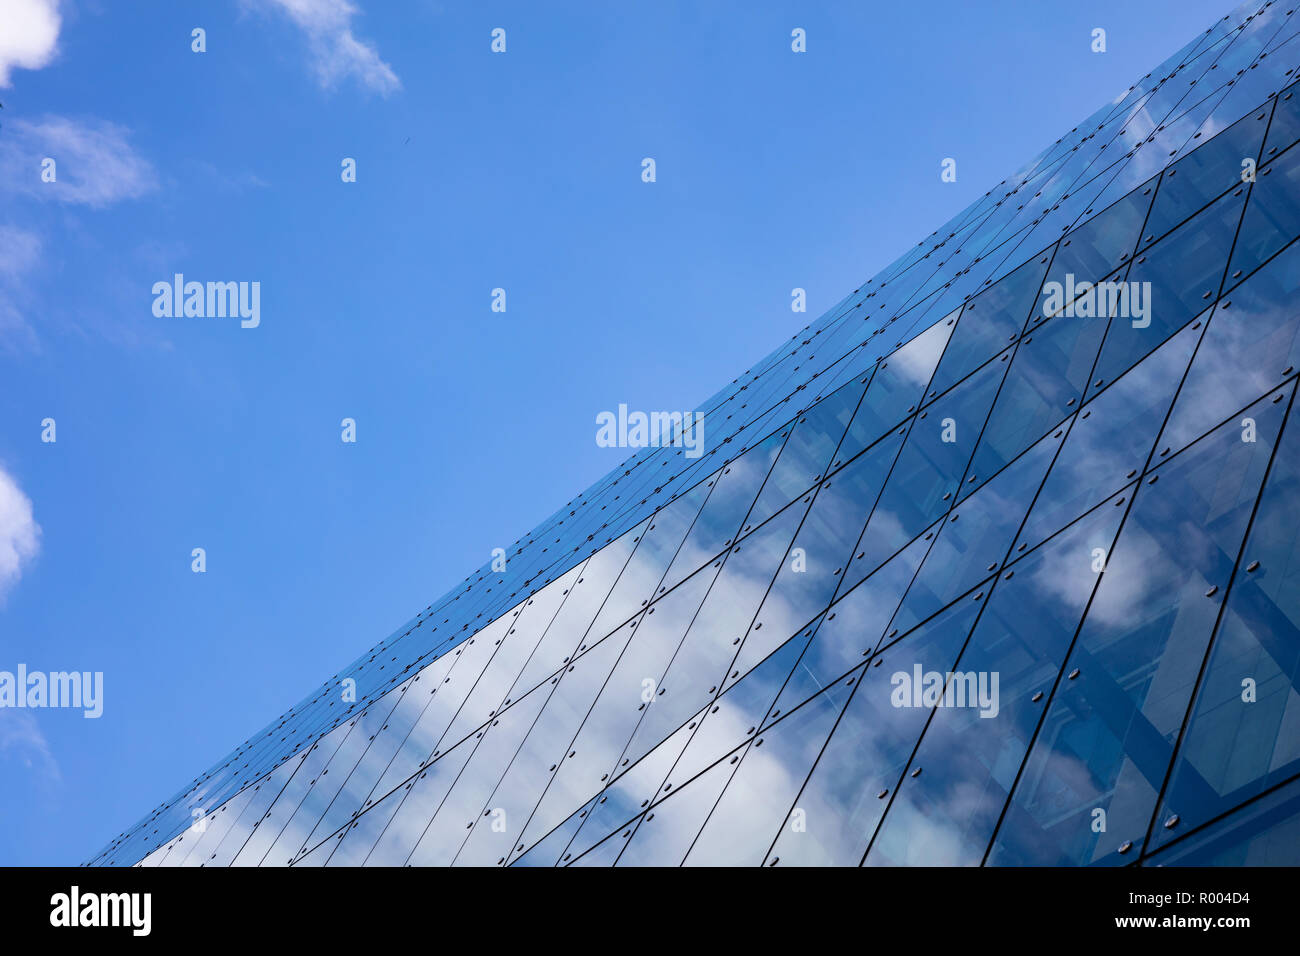 Glass and steel skyscraper multi story office building in Berlin, Germany, low angle, against blue sky background. Stock Photo